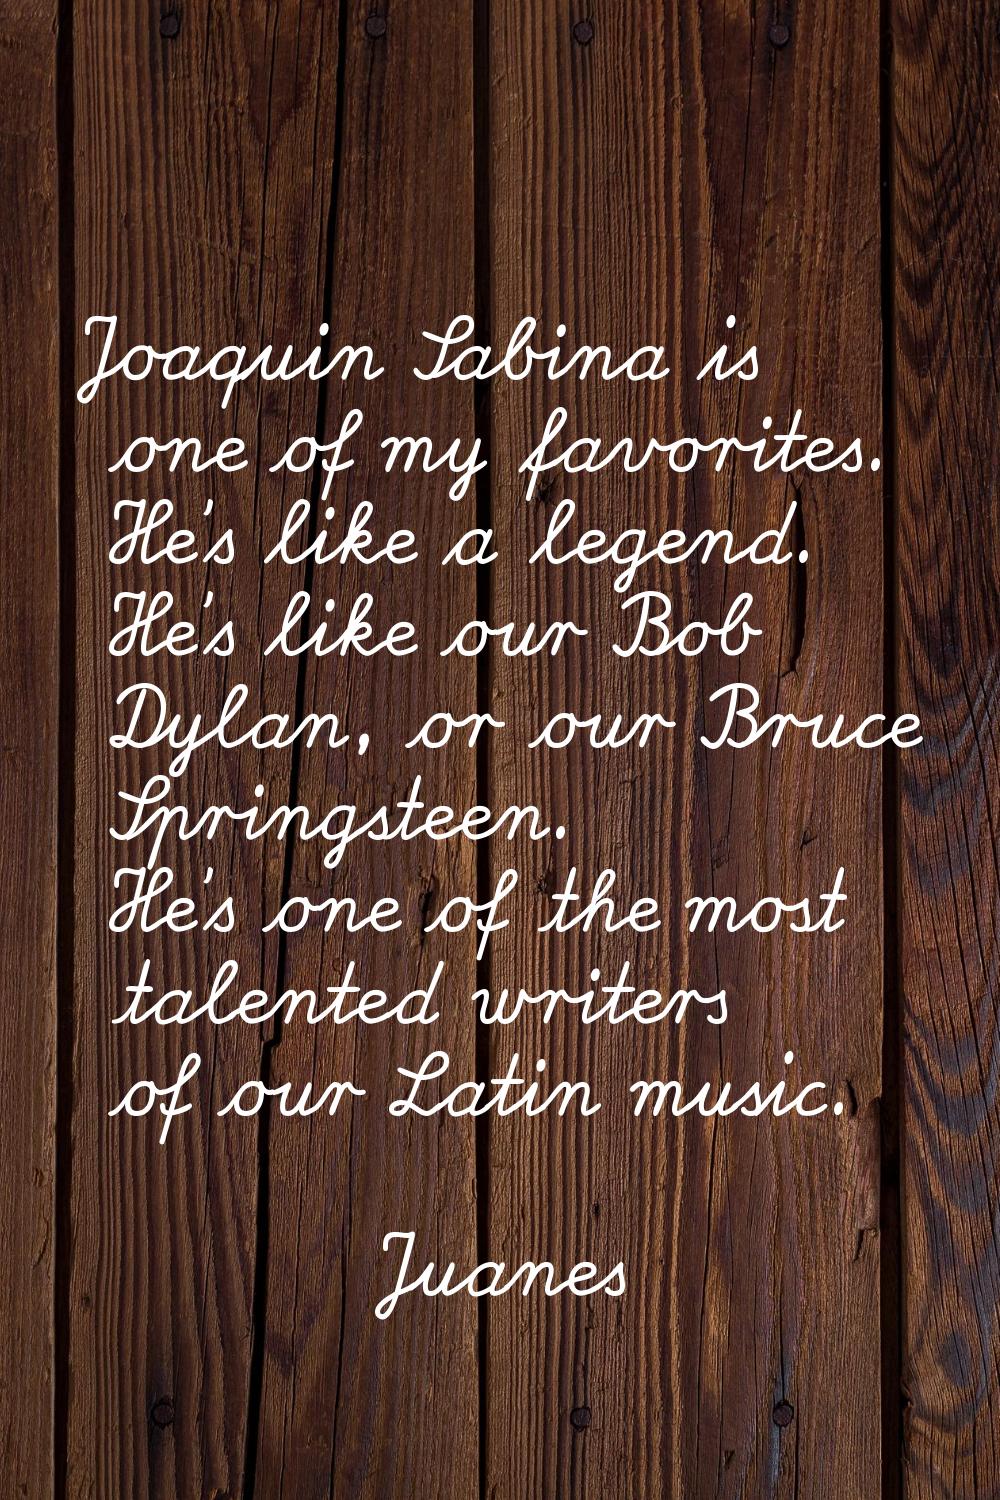 Joaquin Sabina is one of my favorites. He's like a legend. He's like our Bob Dylan, or our Bruce Sp